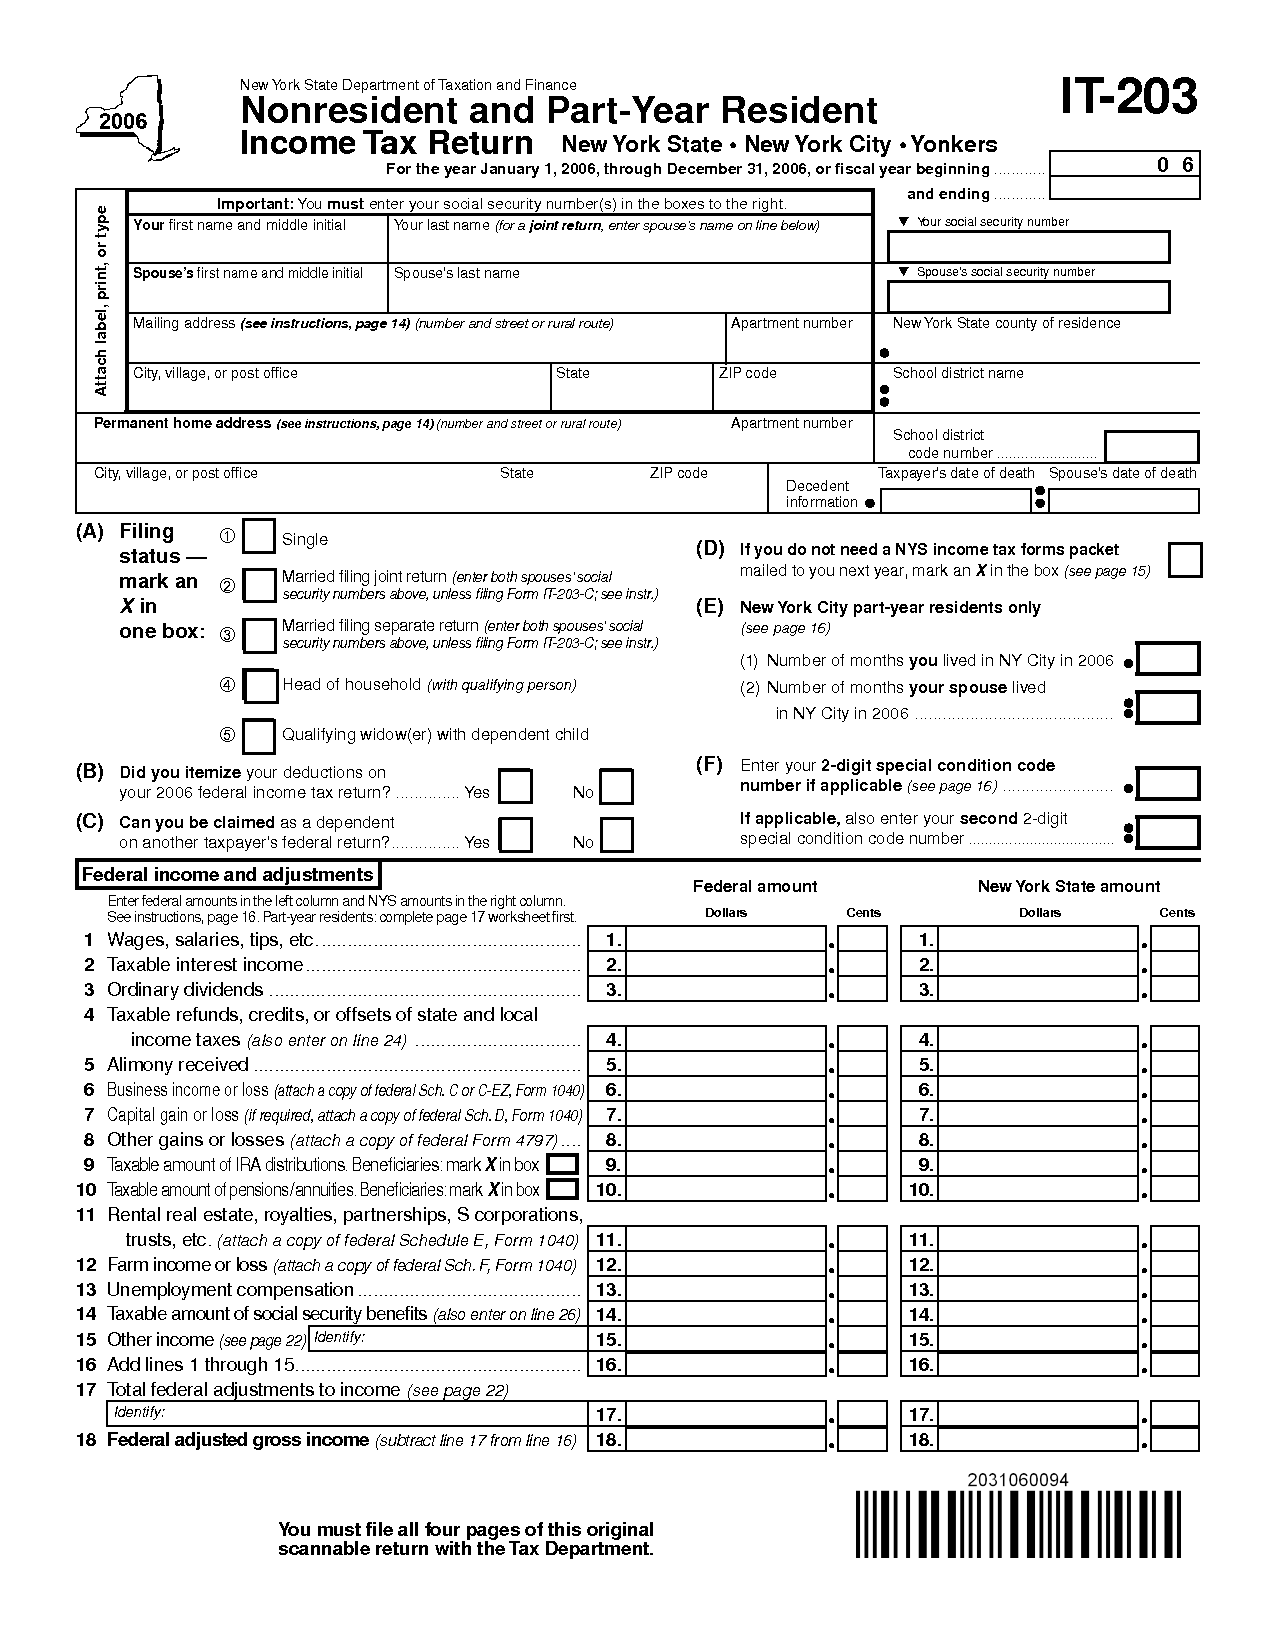 12-best-images-of-federal-income-tax-deduction-worksheet-2014